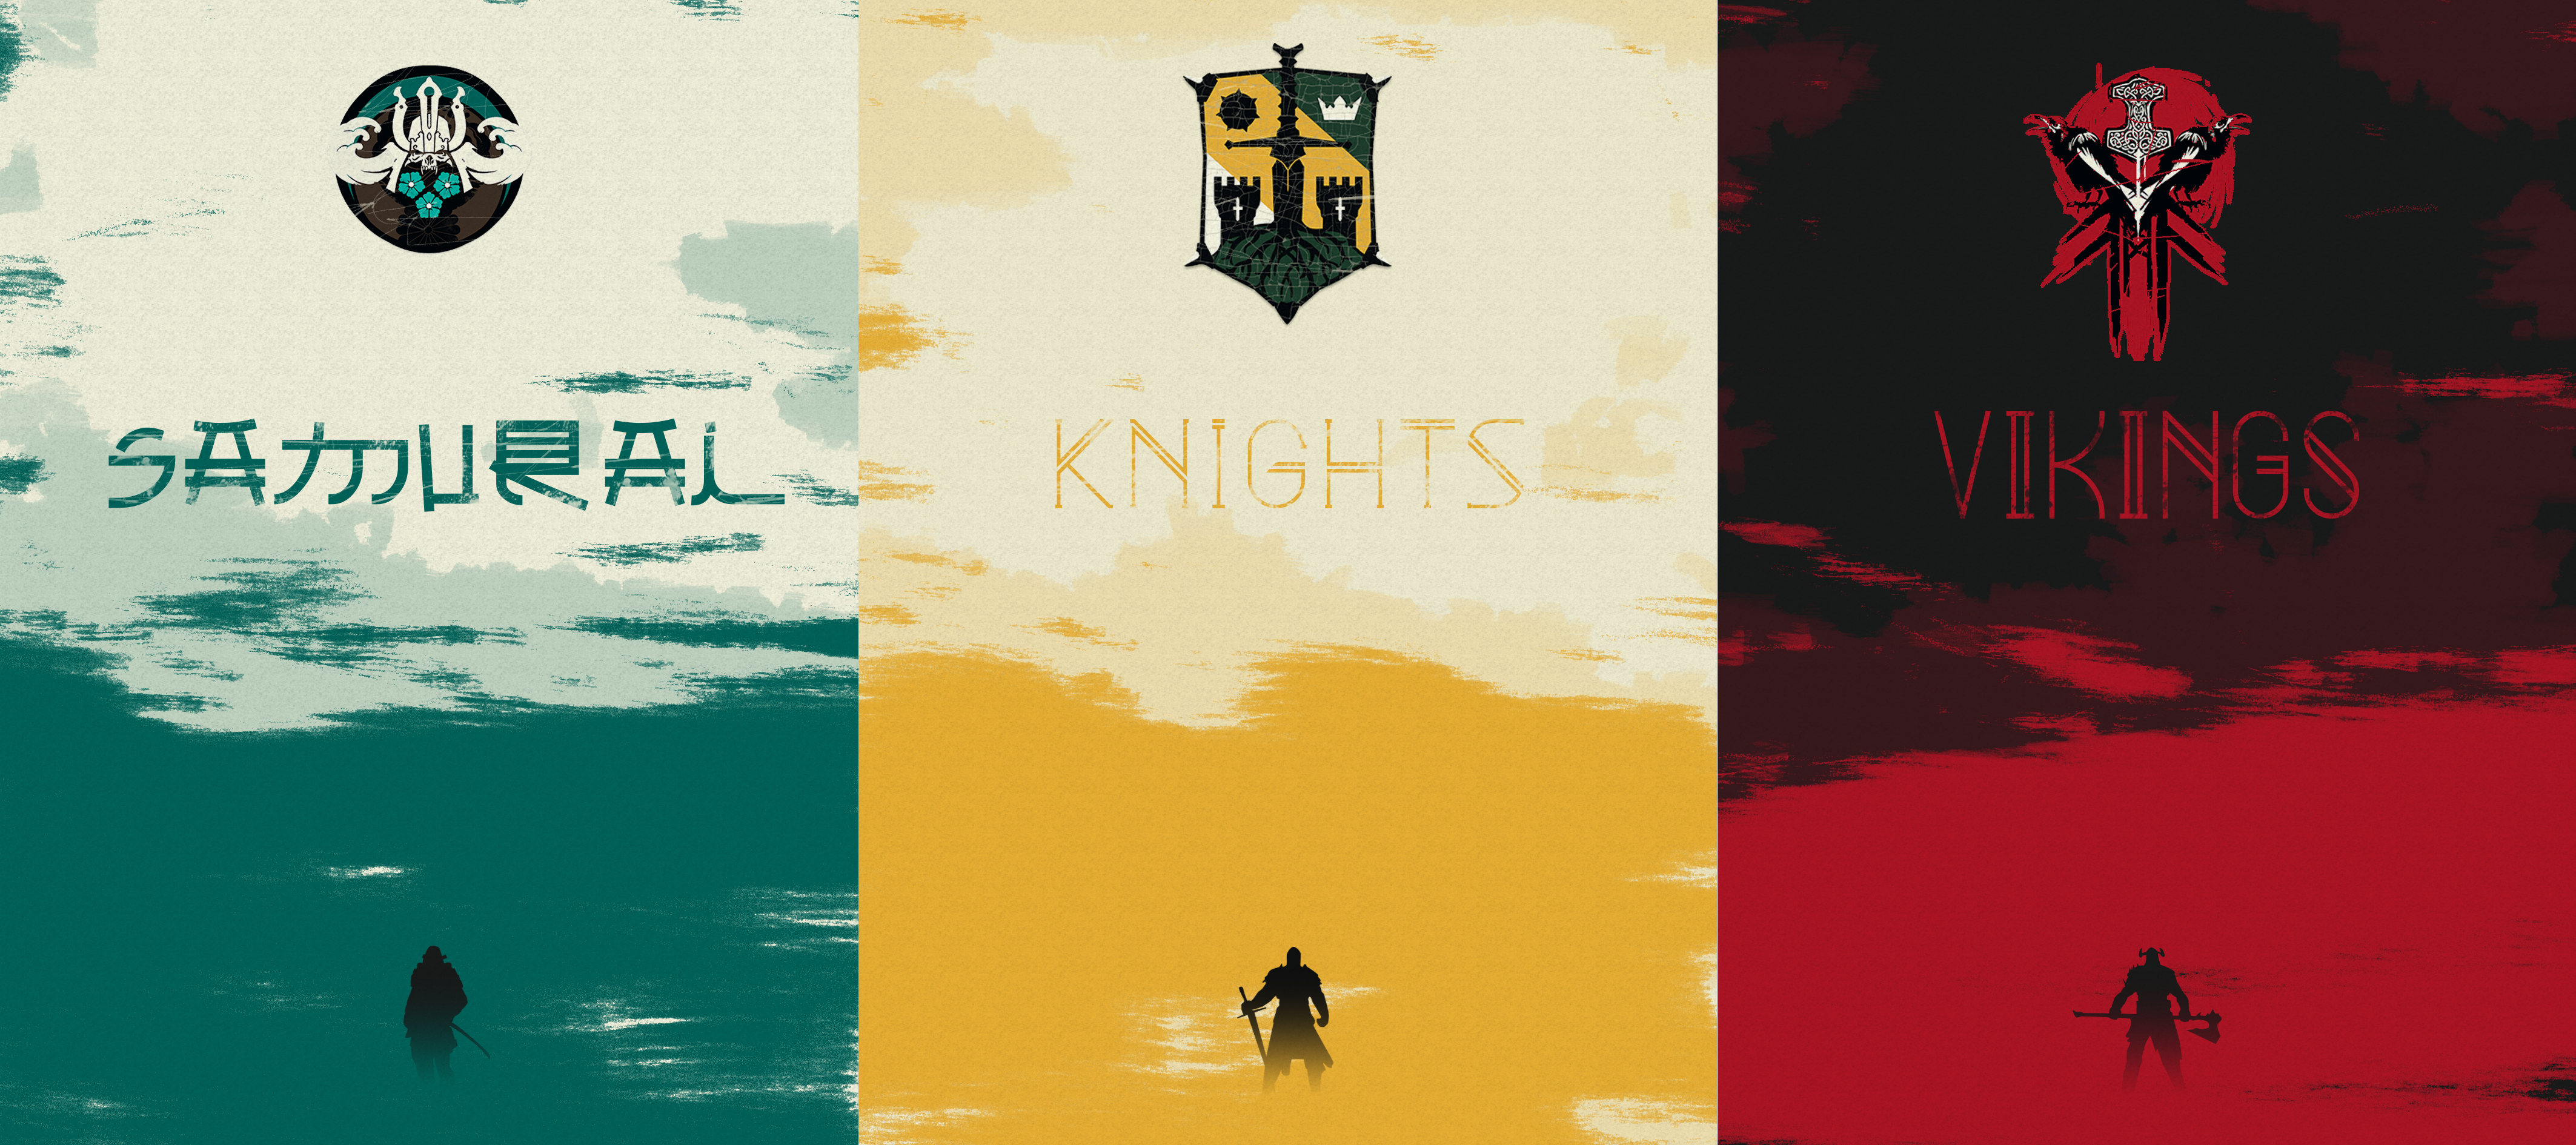 Minimalist For Honor faction posters